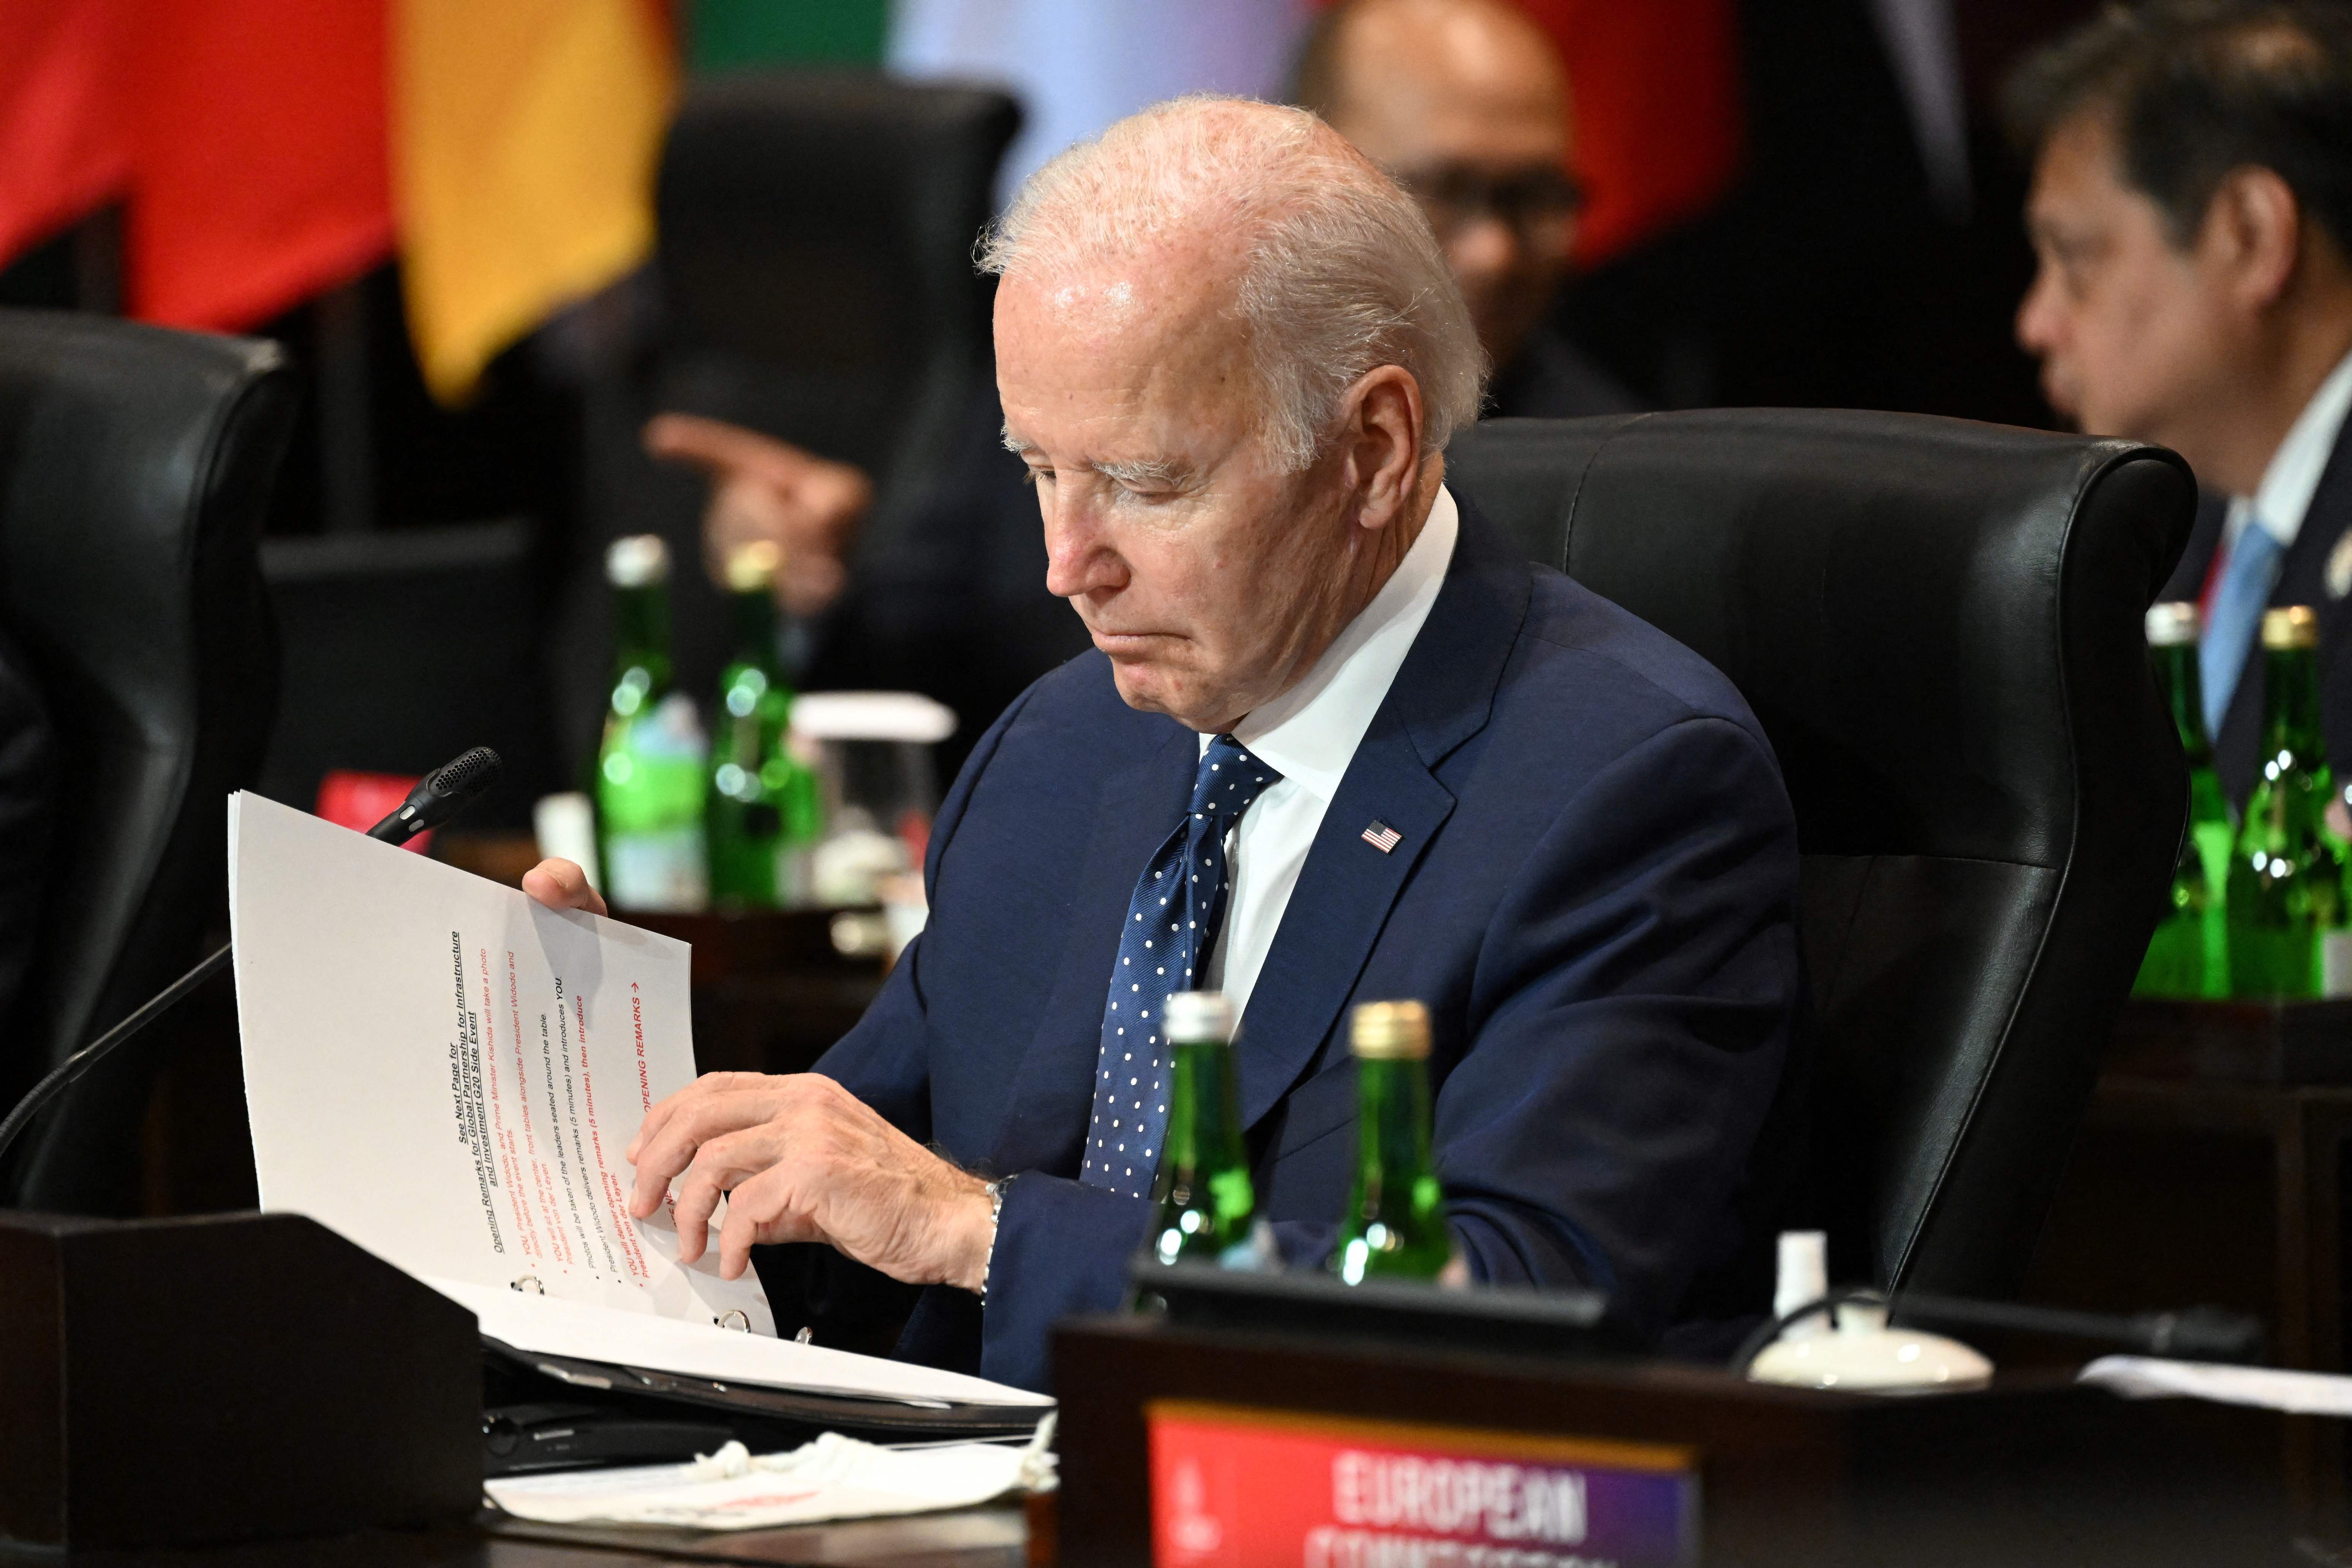 US President Joe Biden attends an event on the Partnership for Global Infrastructure and Investment on the sidelines of the G20 Summit in Nusa Dua on the Indonesian resort island of Bali on 15 November 2022